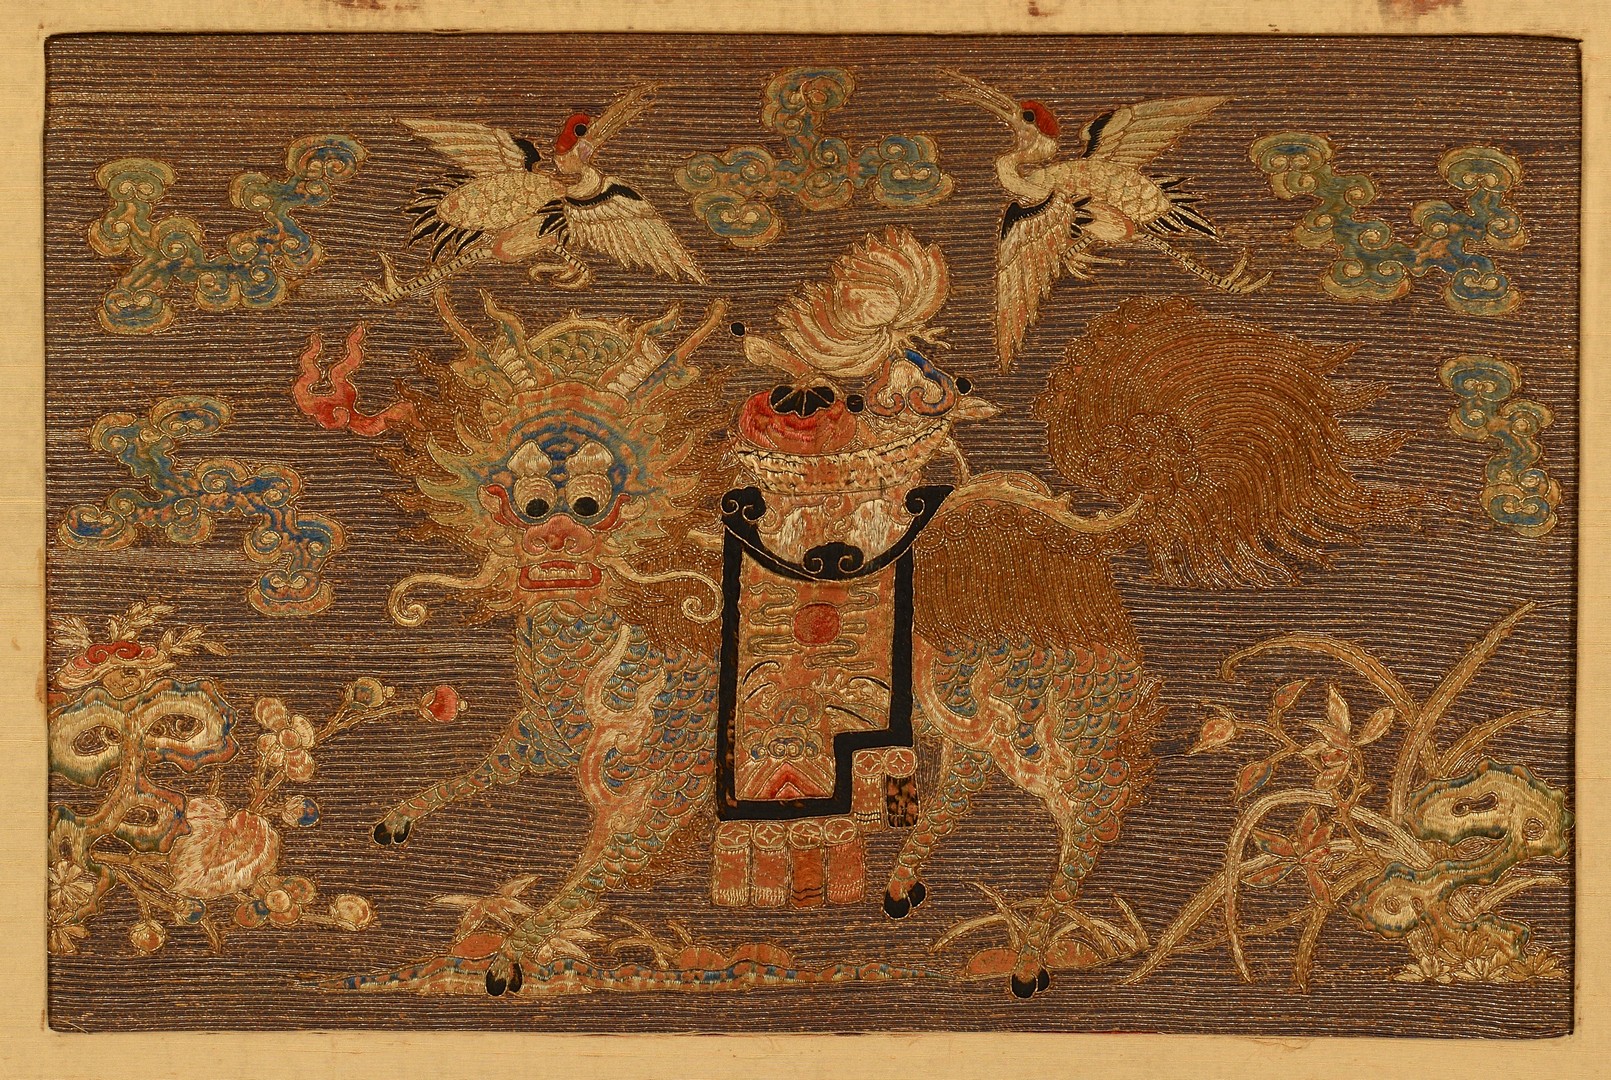 Lot 31: 2 Chinese Gilt Embroidered Framed Panels